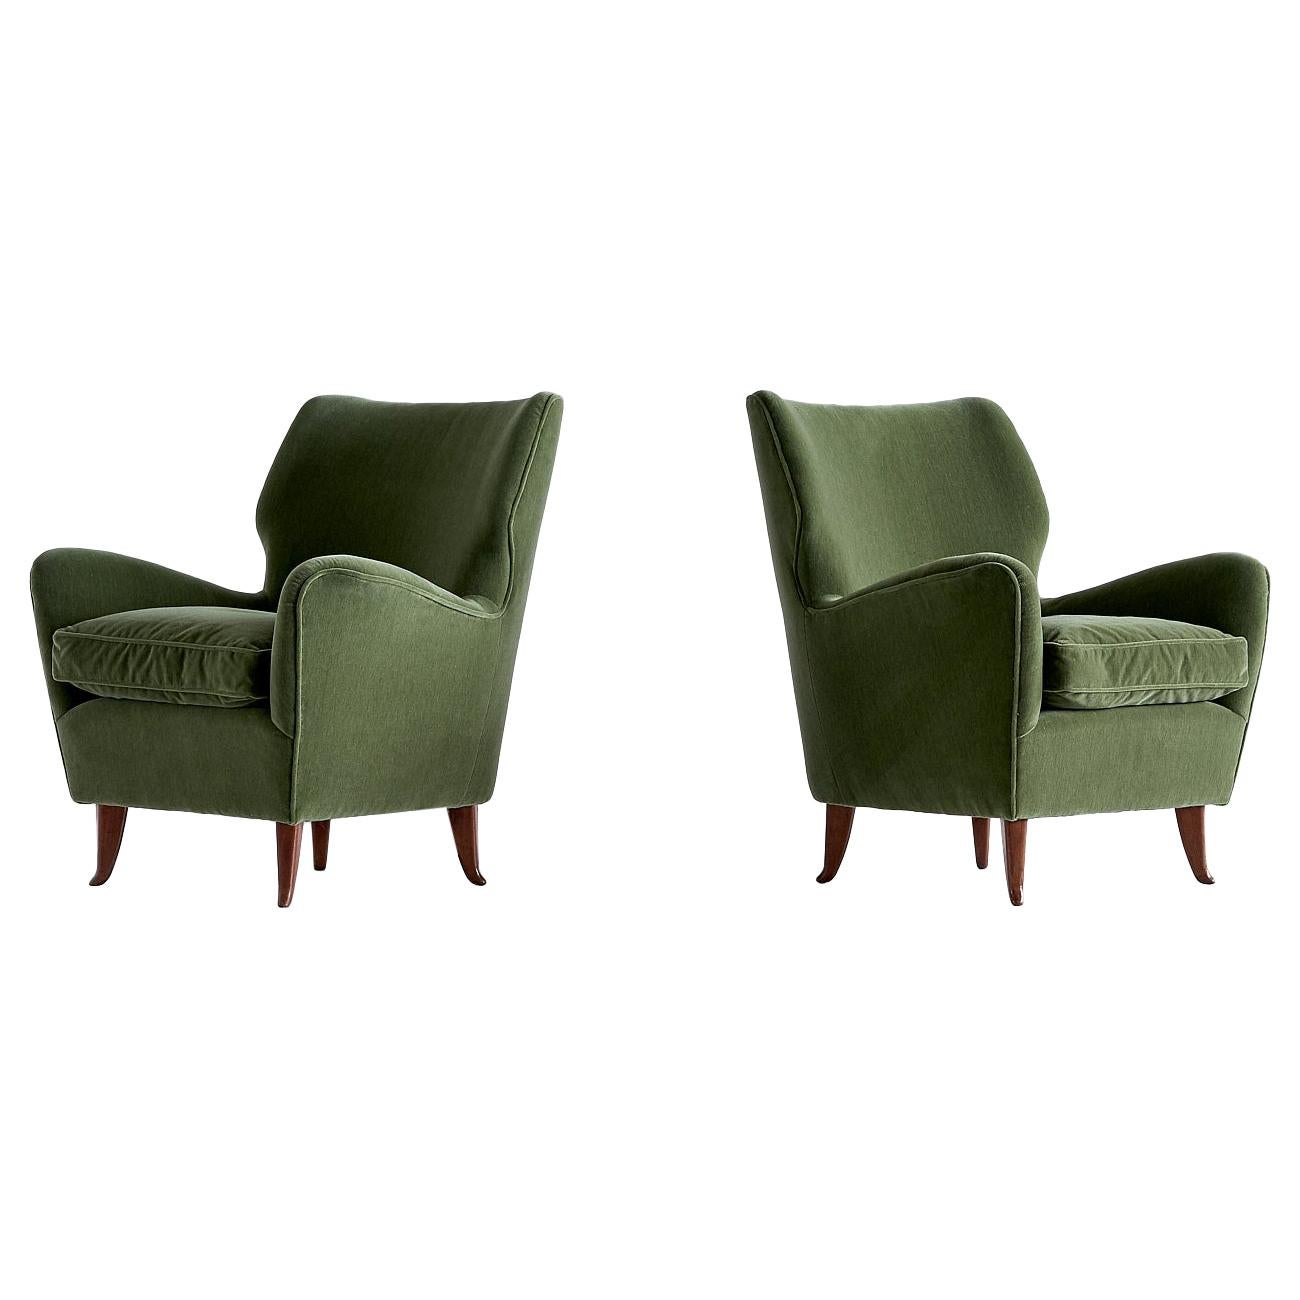 Gio Ponti Pair of Armchairs in Olive Green Velvet and Walnut, Italy, 1949